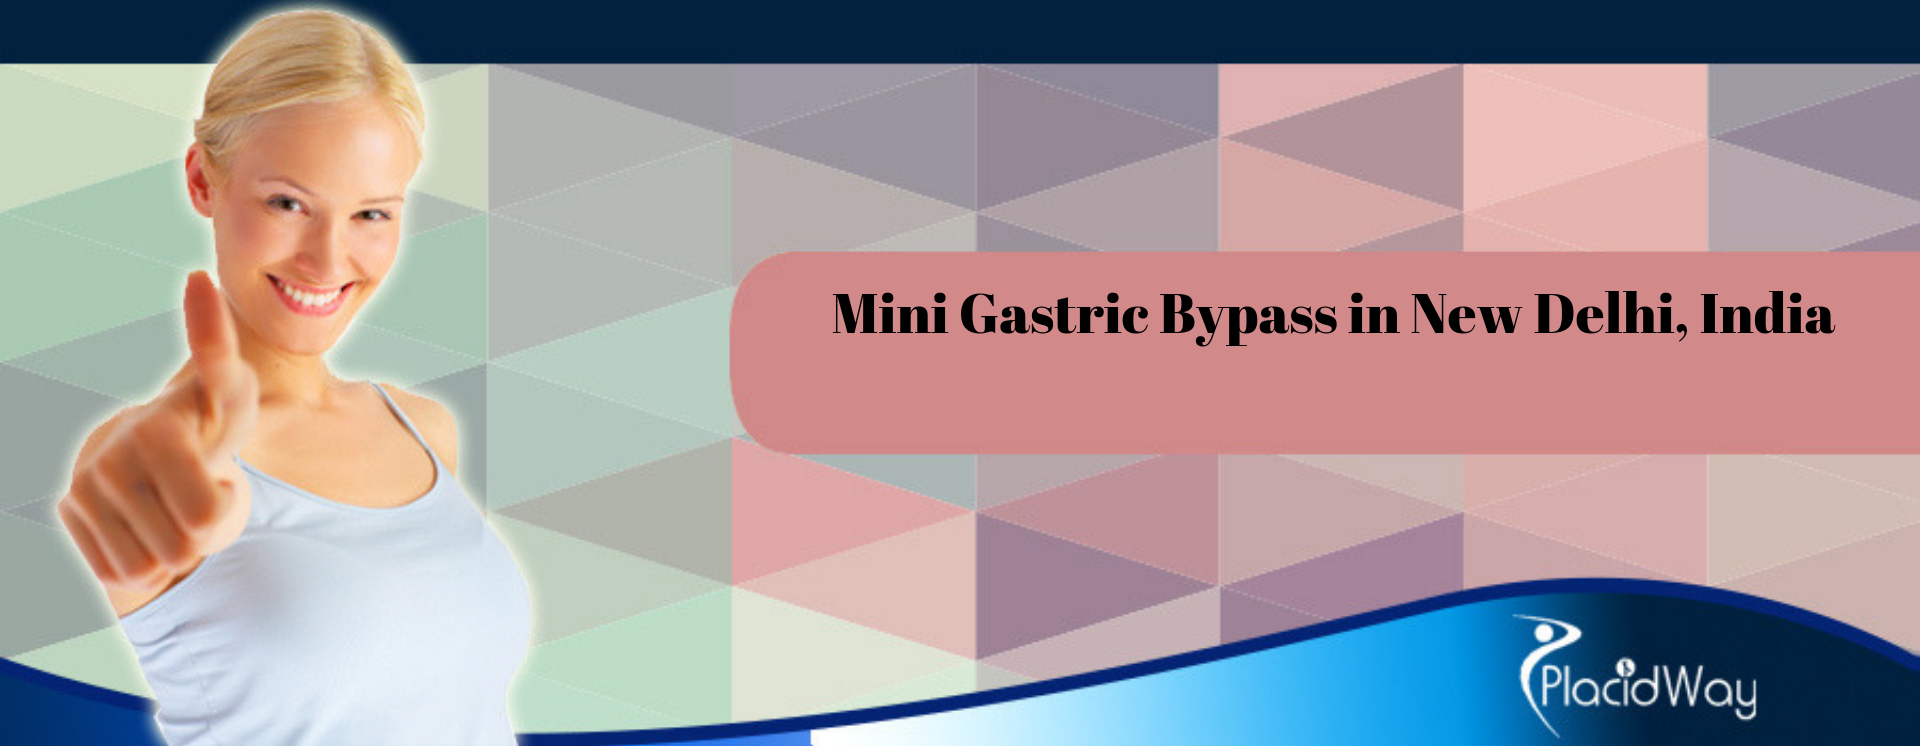 Mini Gastric Bypass in India